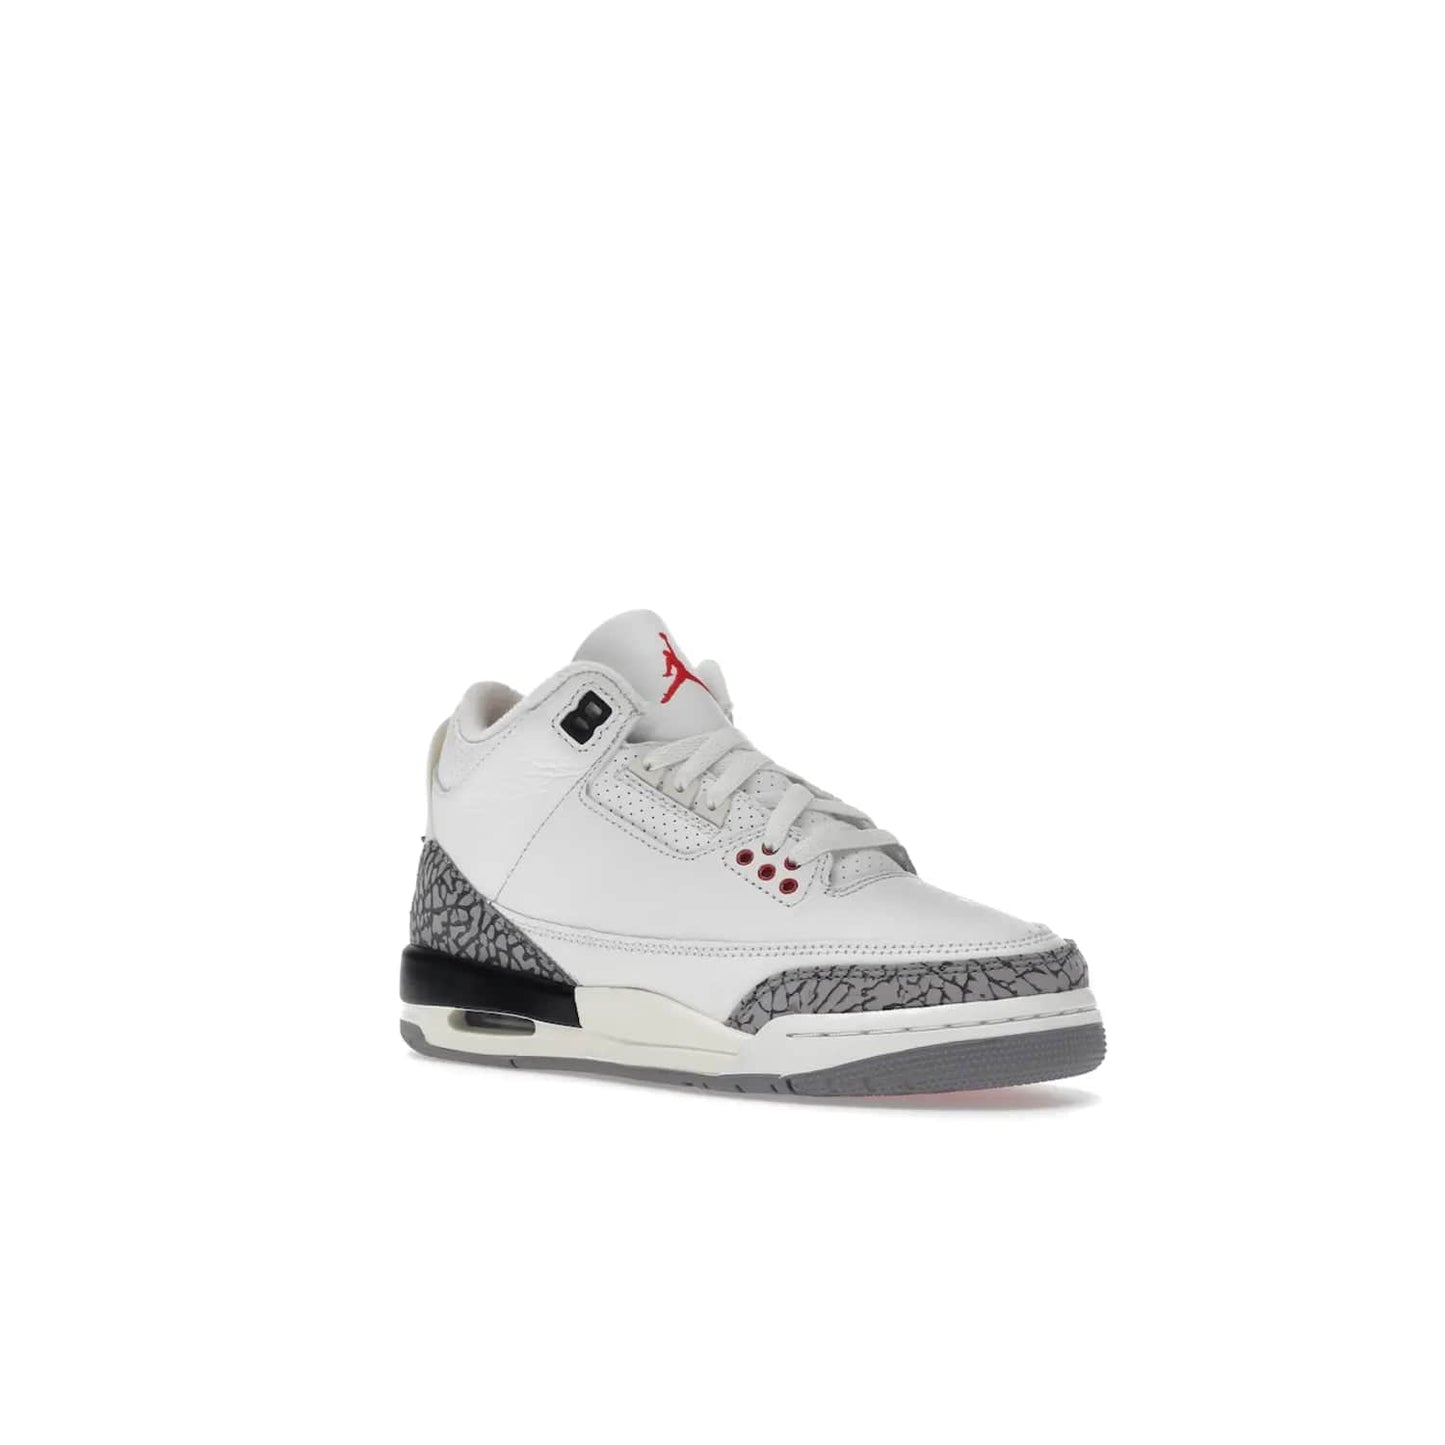 Jordan 3 Retro White Cement Reimagined (GS) - Image 5 - Only at www.BallersClubKickz.com - Grab the perfect blend of modern design and classic style with the Jordan 3 Retro White Cement Reimagined (GS). Features Summit White, Fire Red, Black, and Cement Grey colorway, iconic Jordan logo embroidered on the tongue, and “Nike Air” branding. Limited availability, get your pair before March 11th 2023.